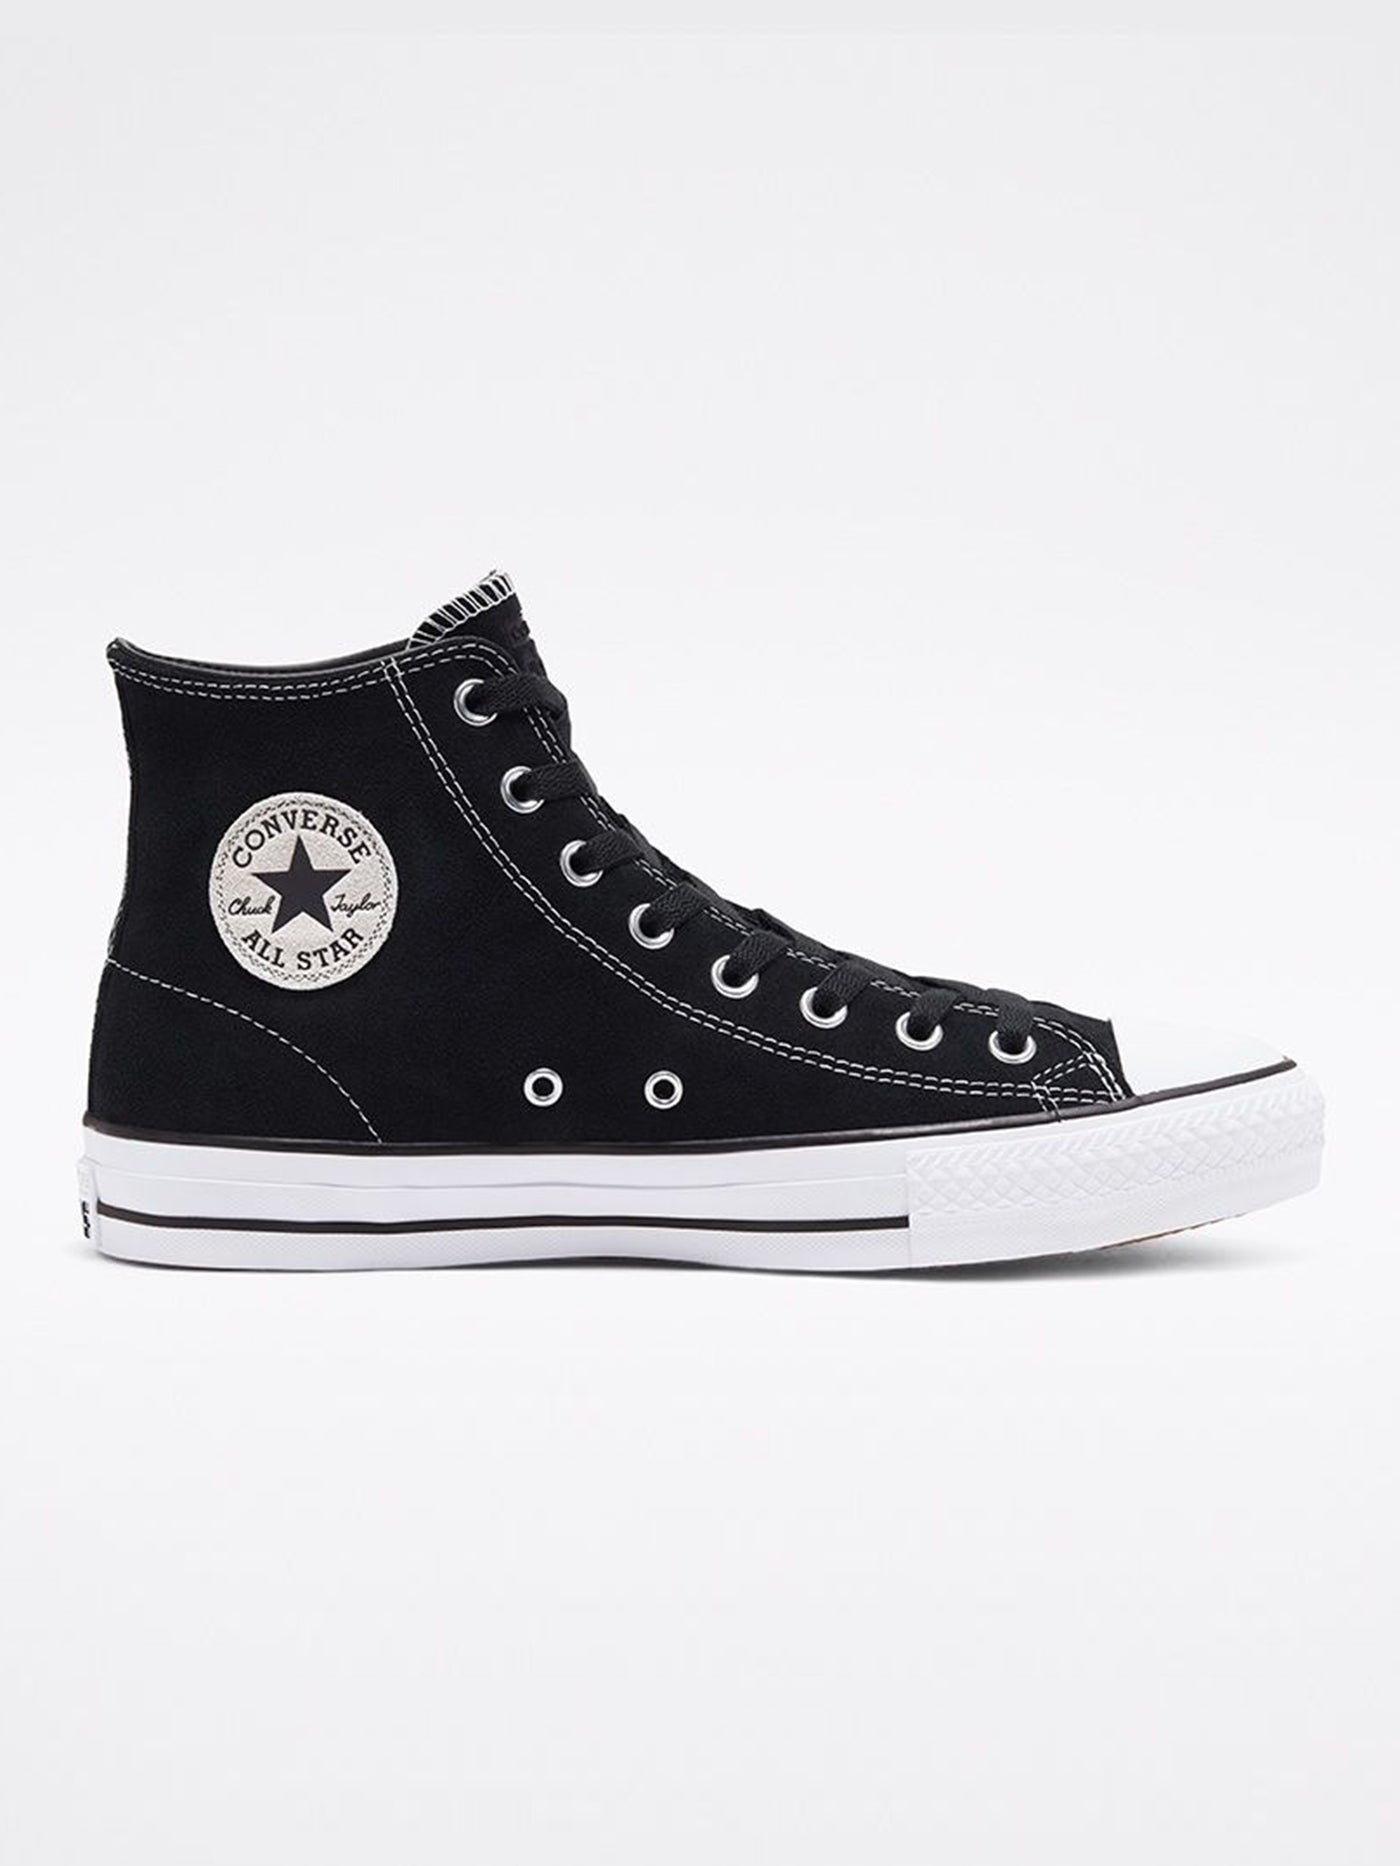 Converse Chuck Taylor All Star Pro High Black/White Shoes